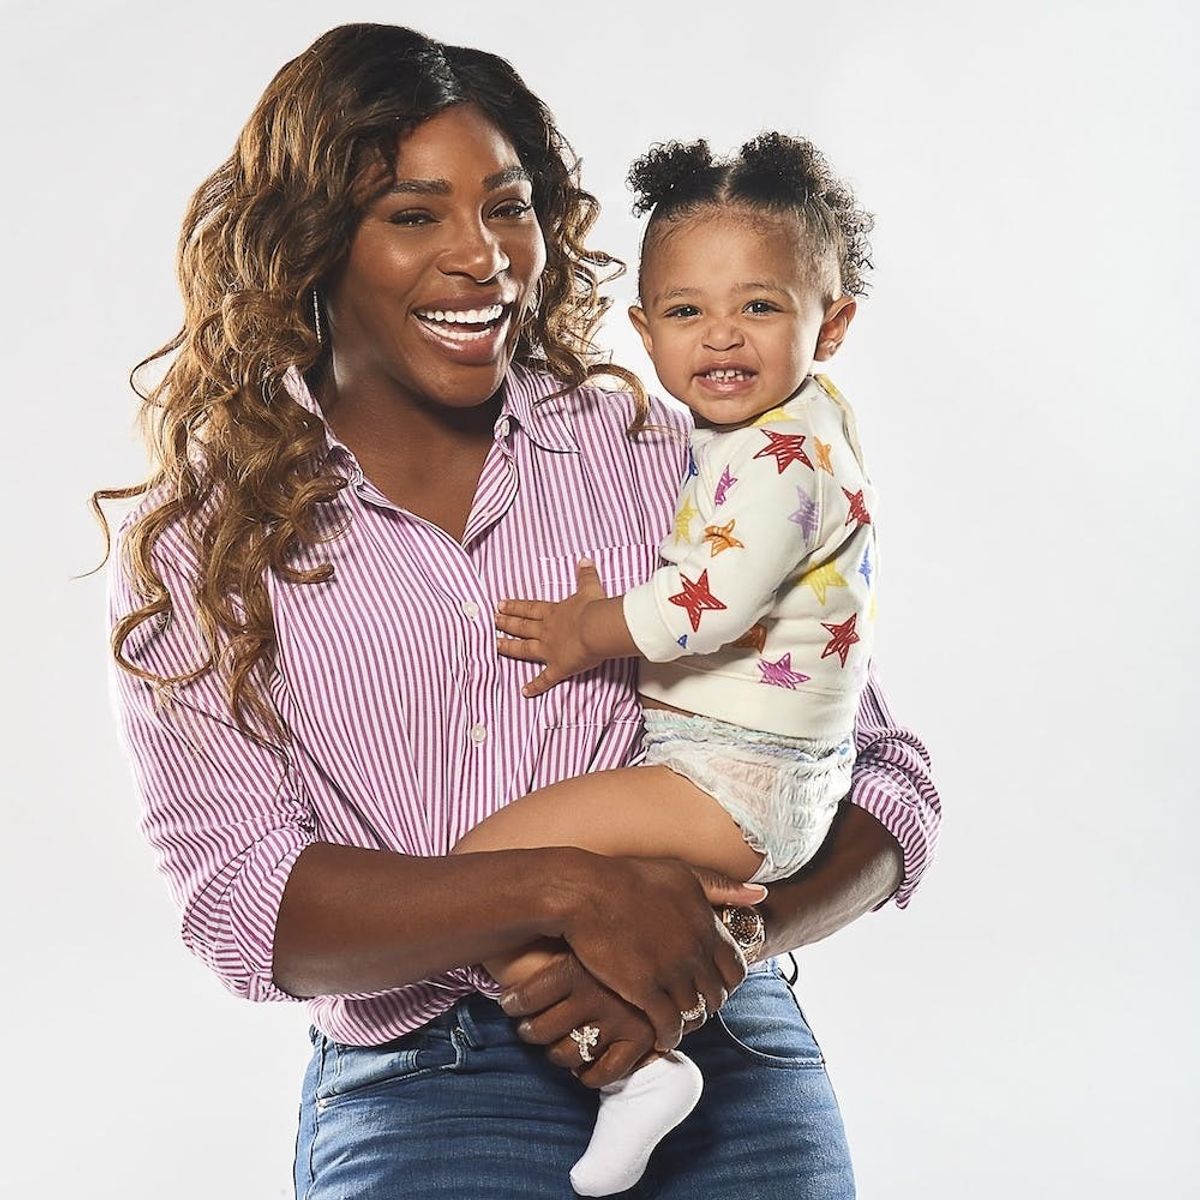 Serena Williams Gets Real About Raising a Strong Daughter